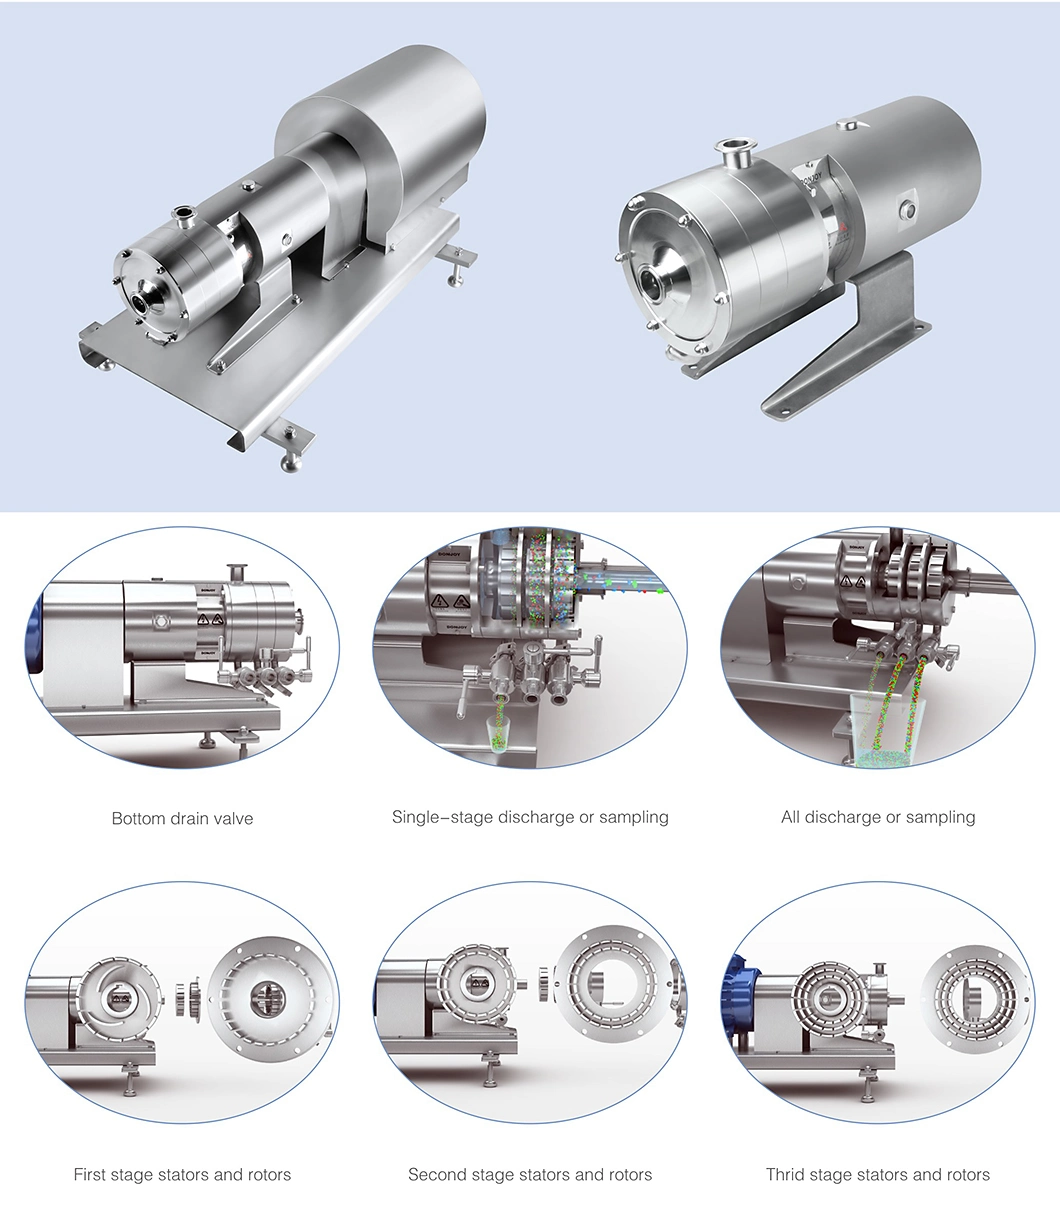 3A Sanitary Donjoy Emulsified Homogeneous Mixing Pump Manufacturer in China